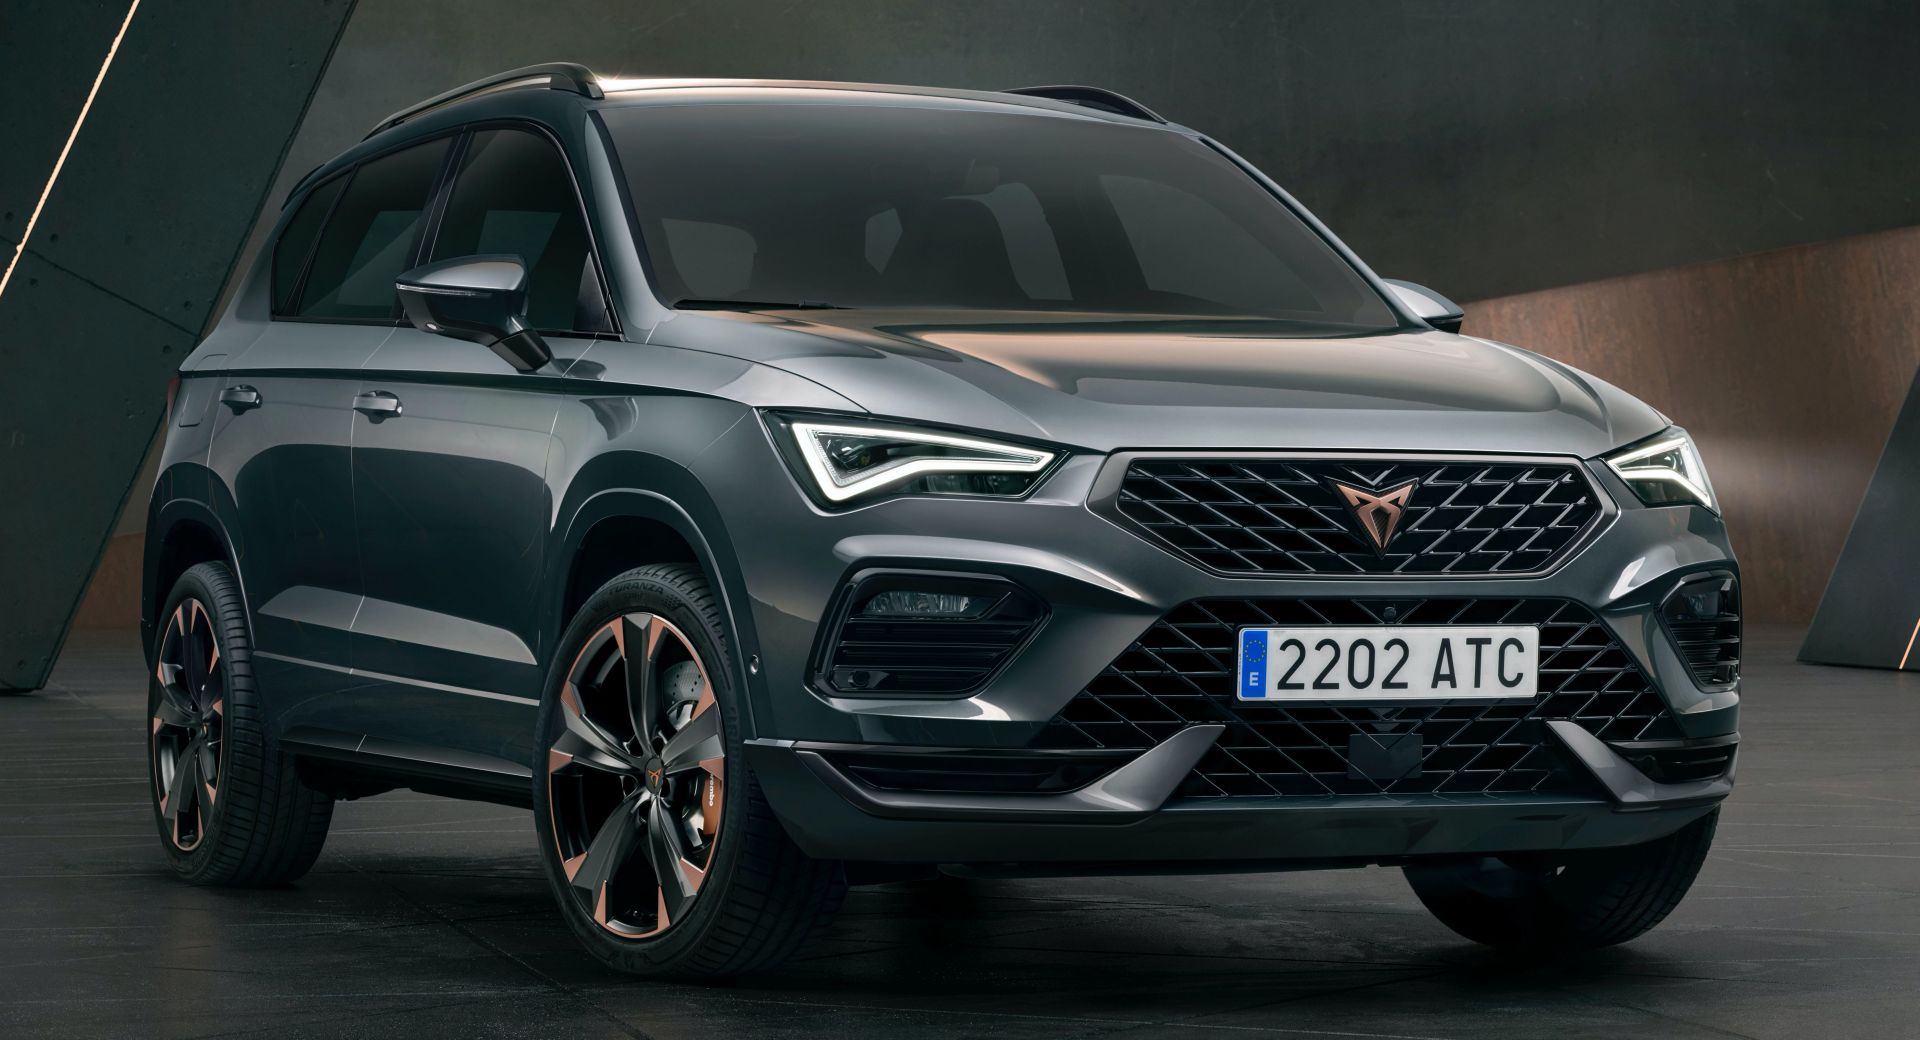 2021 Cupra Ateca Performance SUV Gets Styling And Tech Upgrades, Retains  296 HP Powertrain